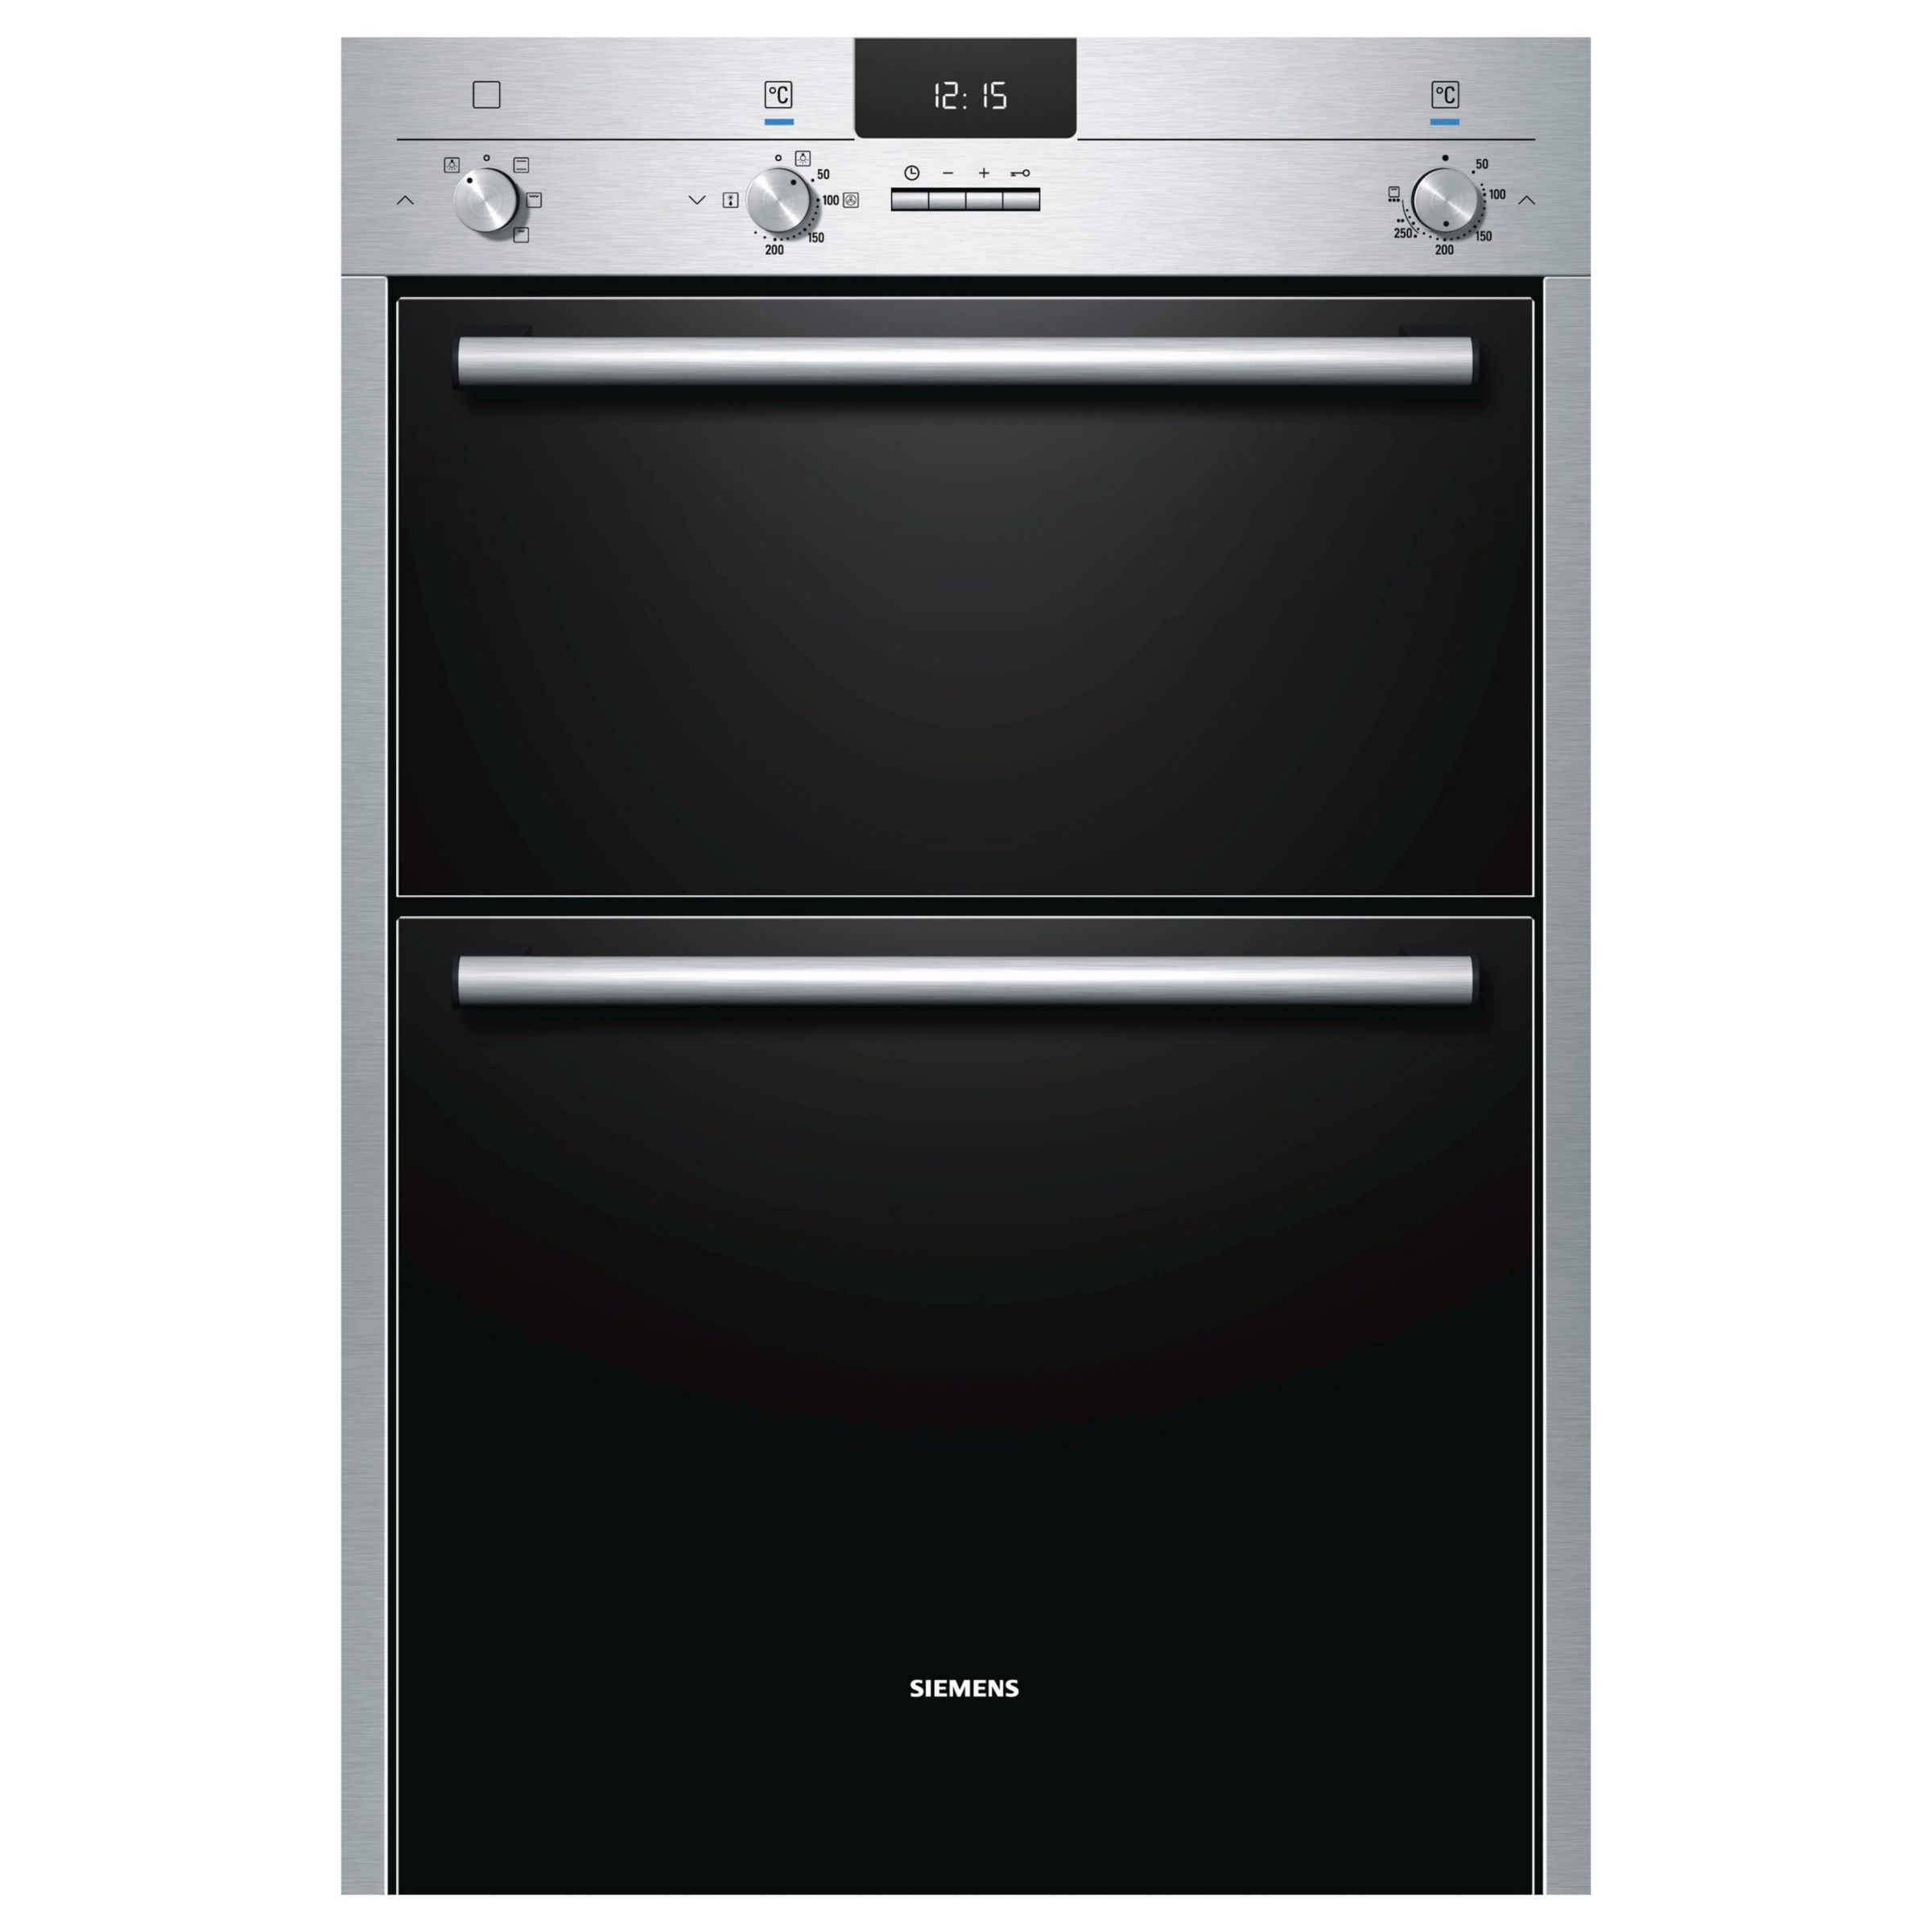 Siemens HB13MB521B Double Electric Oven, Stainless Steel at John Lewis